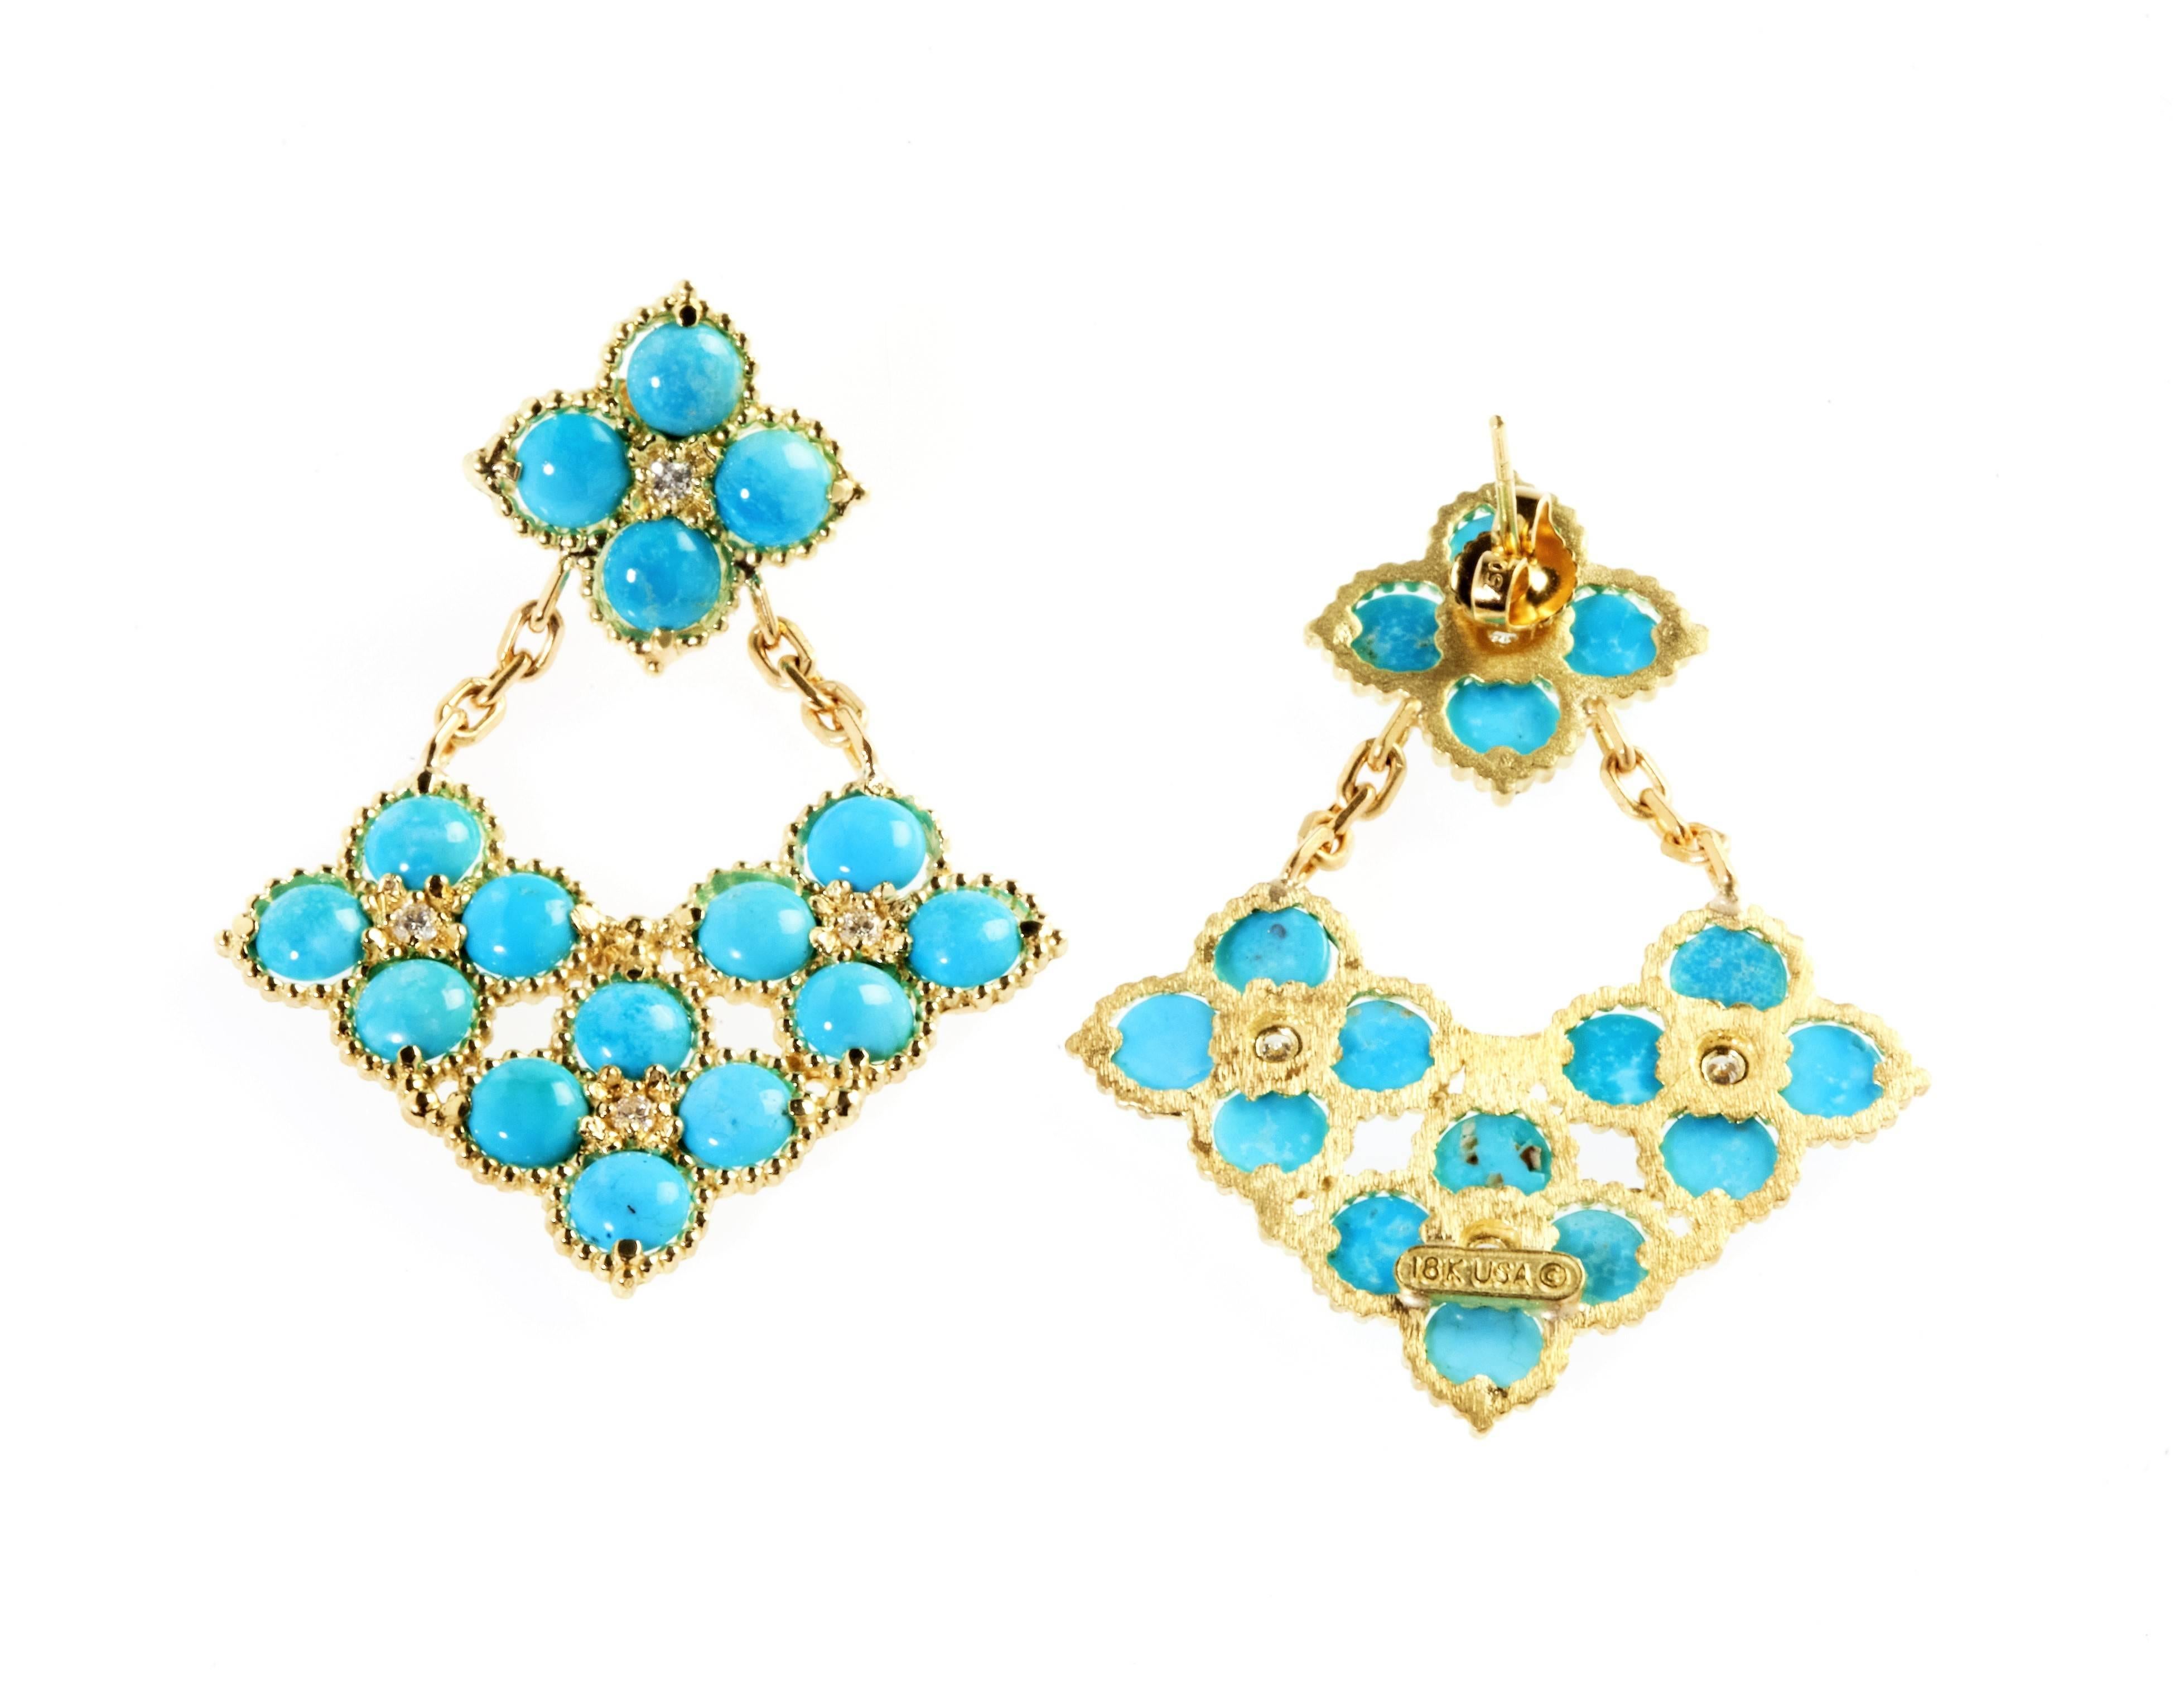 Stambolian Sleeping Beauty Turquoise 18K Gold Diamond Floral Drop Earrings

NO RESERVE PRICE 

Each turquoise is 5mm, 15.00ct. total weight (32 total). Sleeping beauty turquoise has become one of the worlds most sought after gemstones and it has